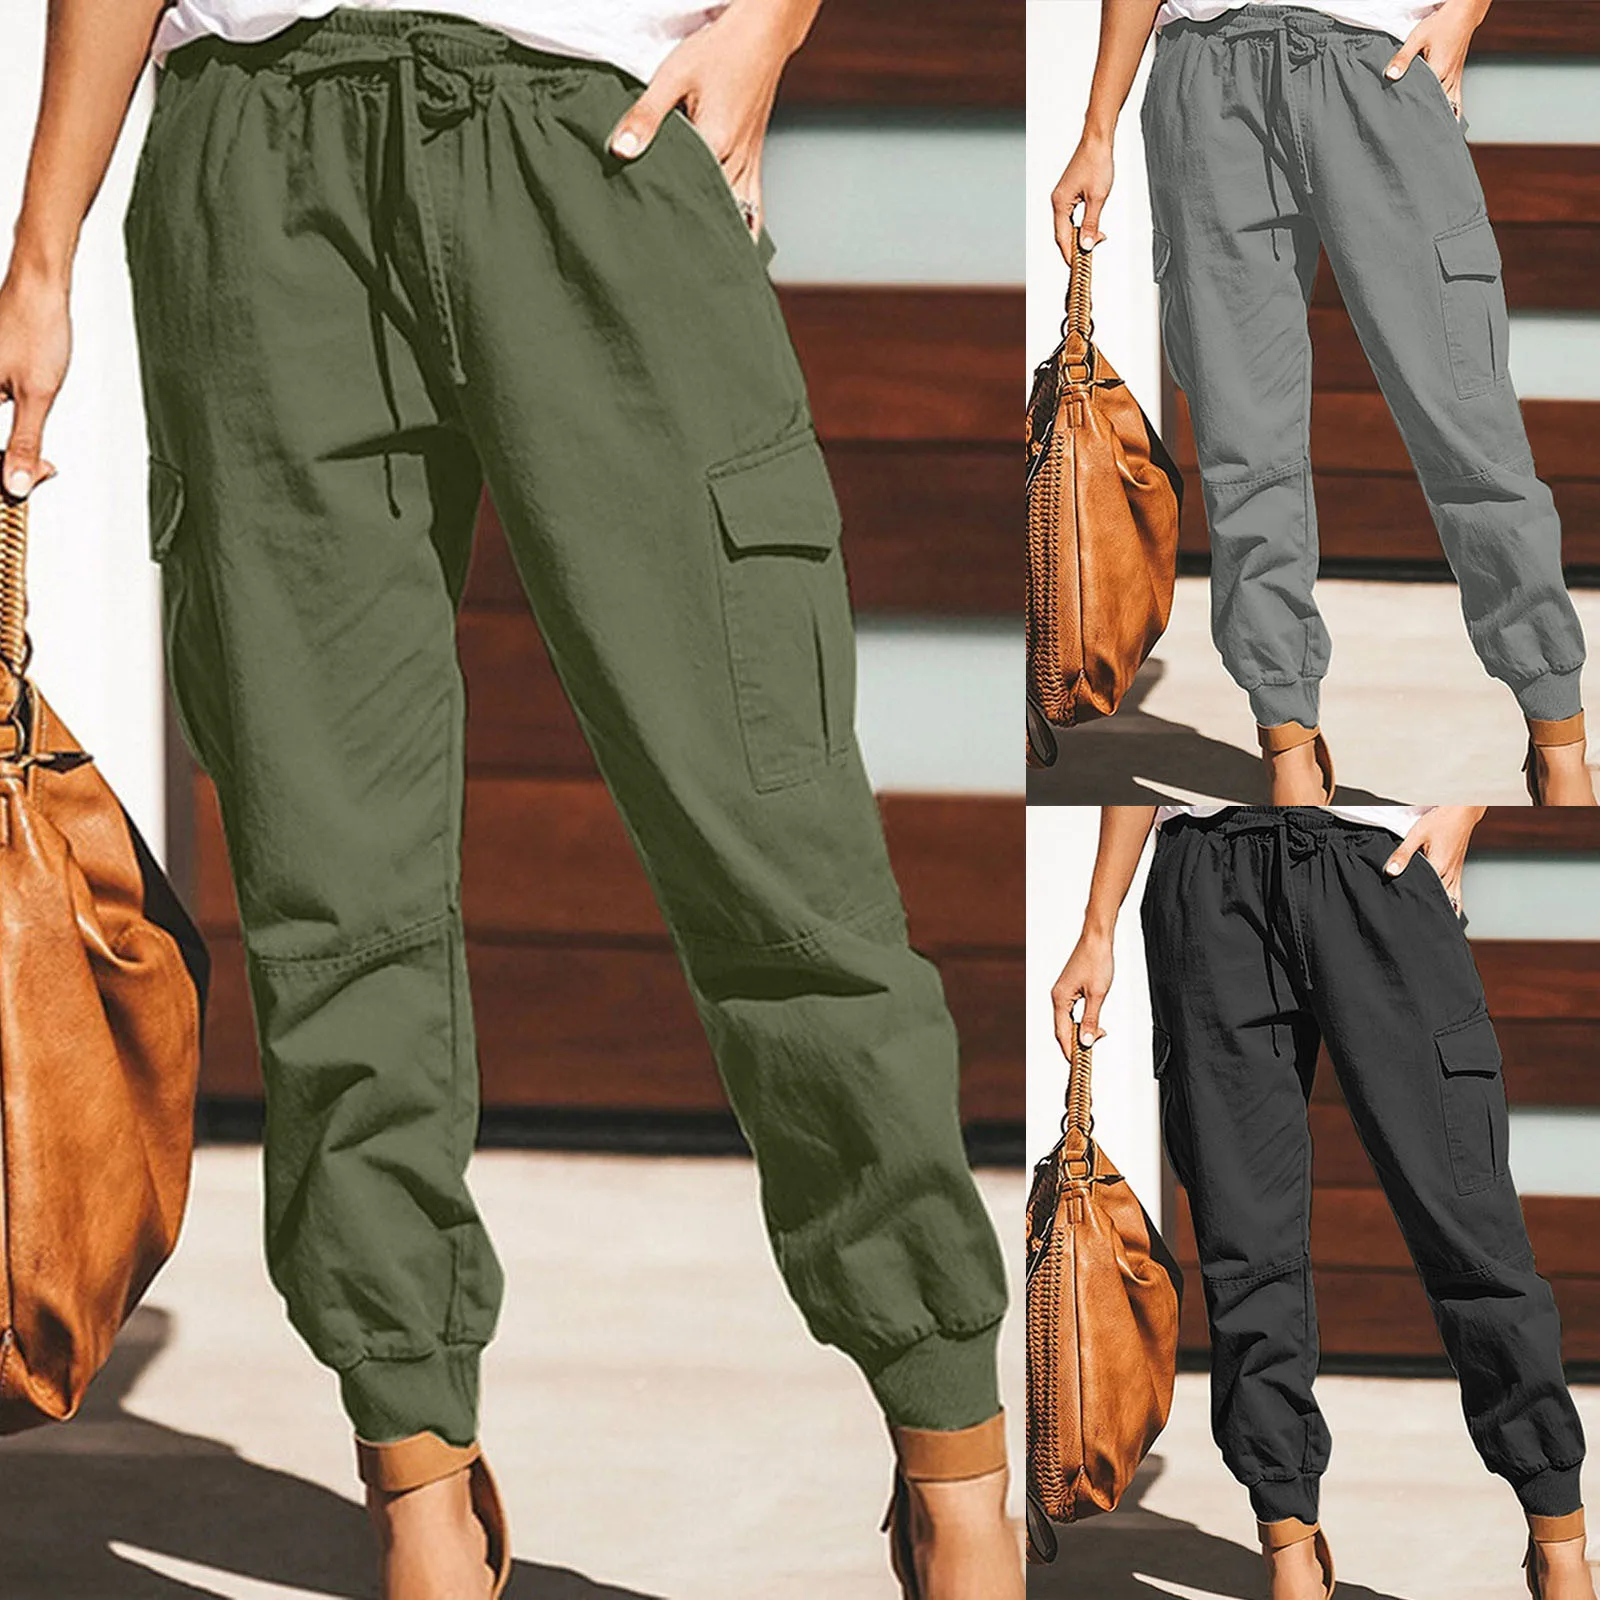 Women Pockets Casual Pants Fashion Solid Overalls Mid Waist Drawstring Loose Cargo Pants Streetwear Casual Trousers Sweatpants